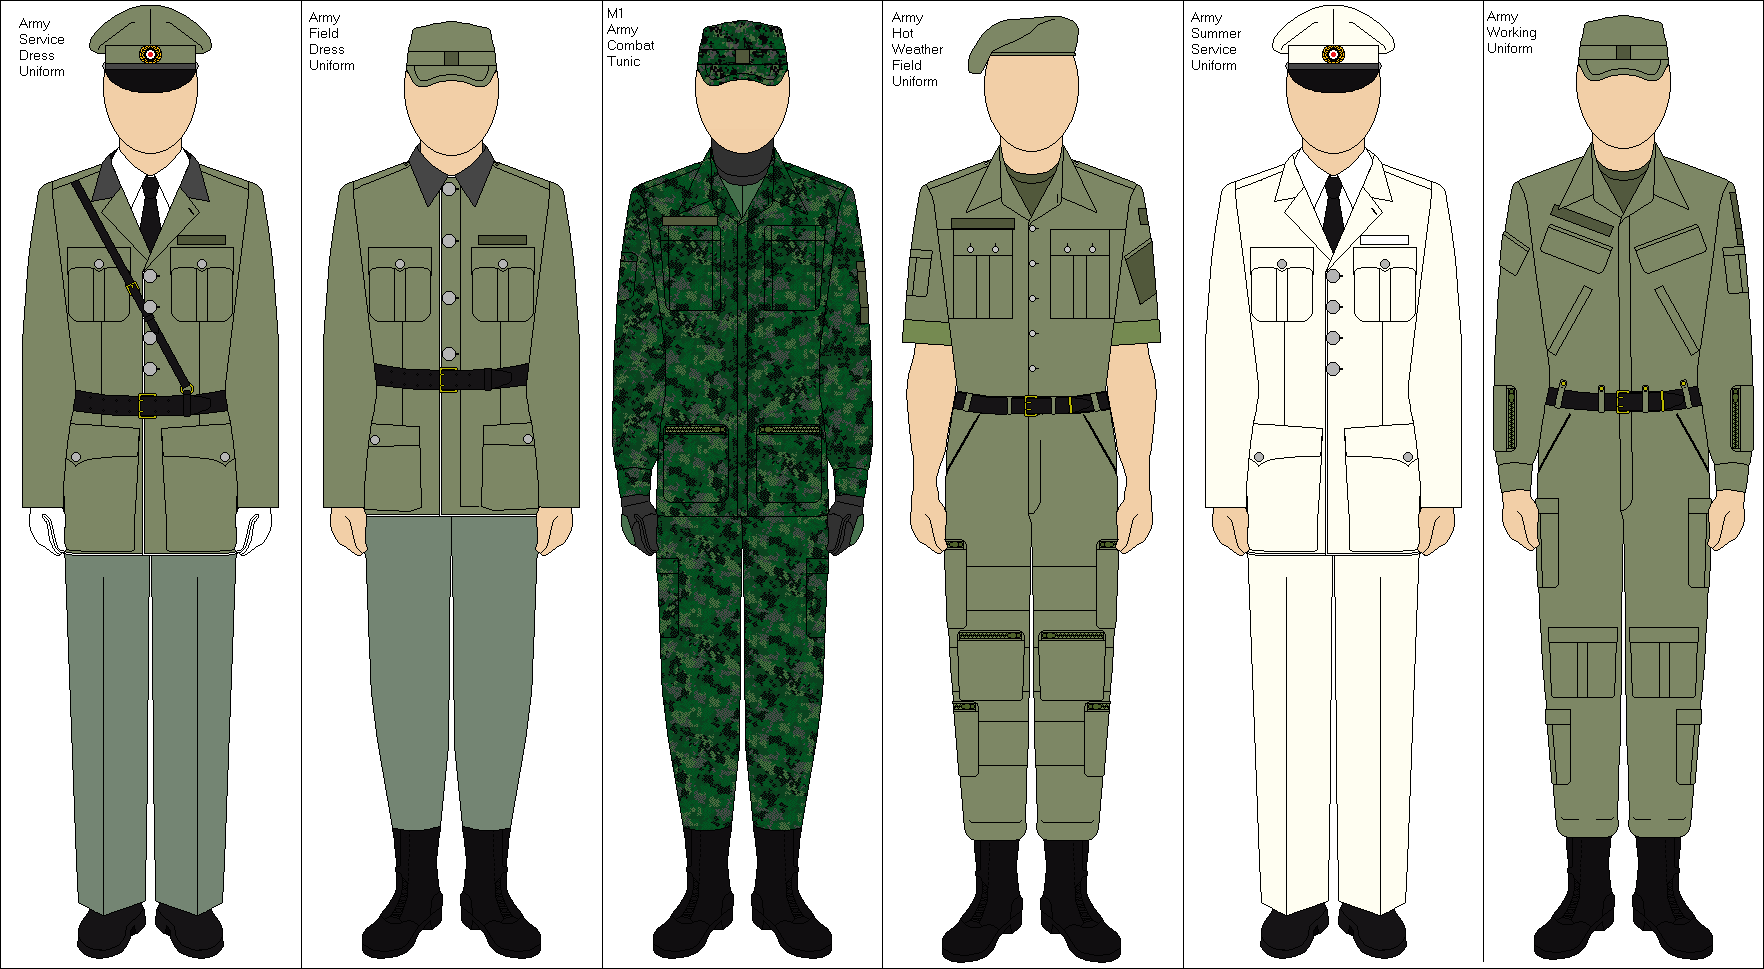 Rank Insignia and Uniforms Thread | Page 31 | Alternate History Discussion1764 x 969